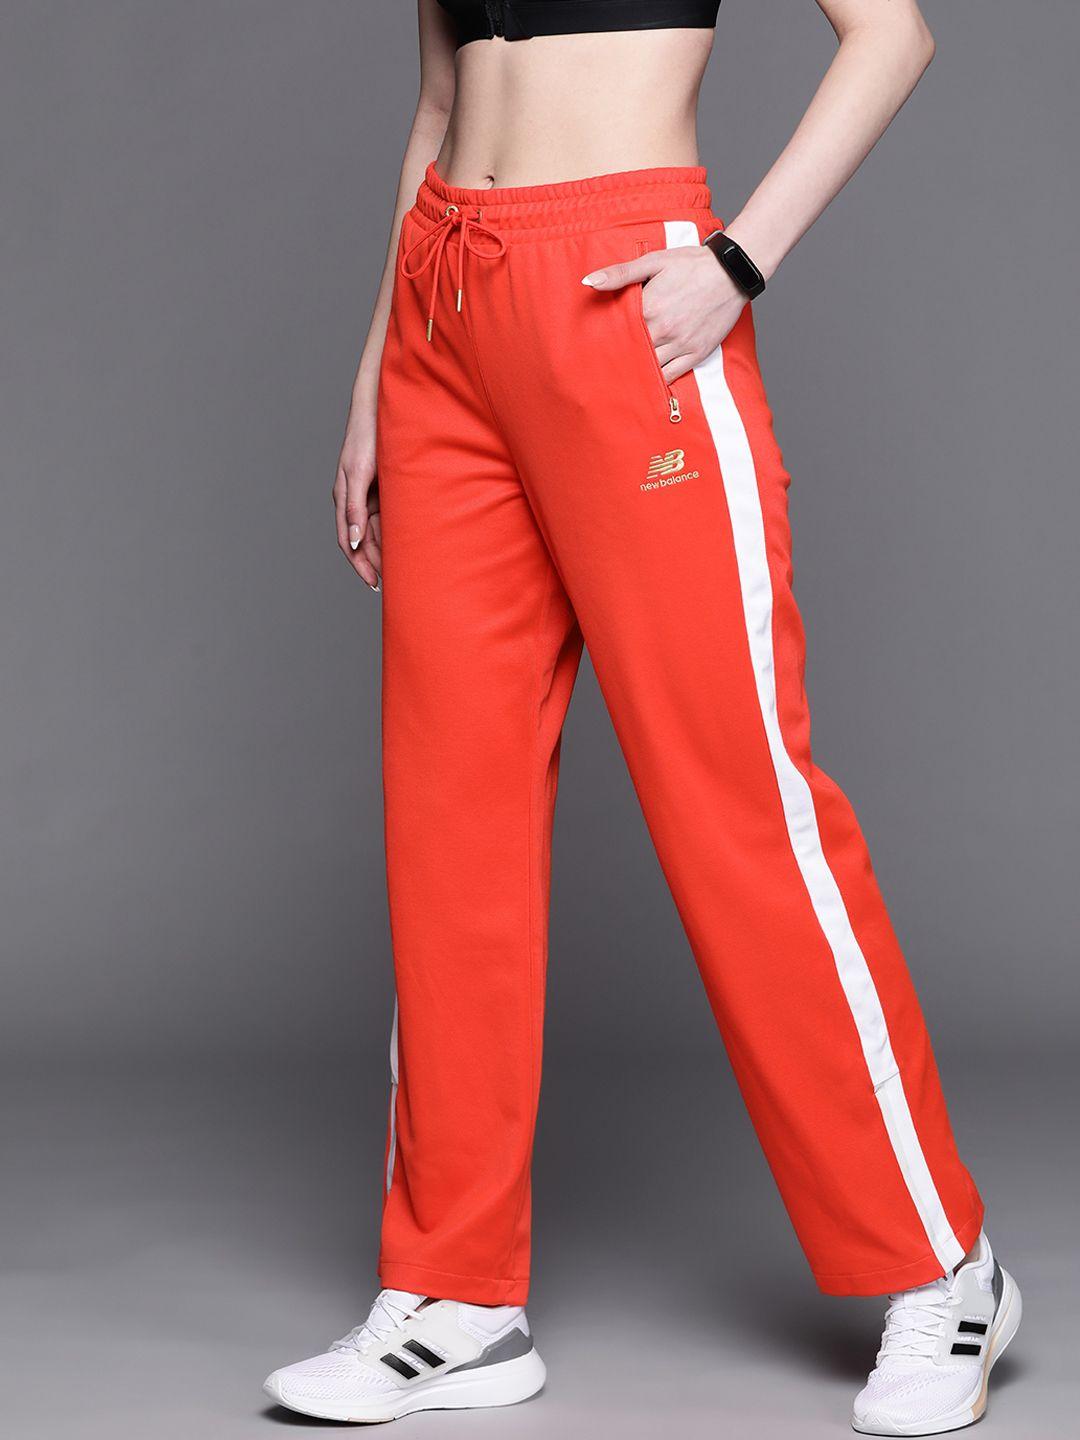 new balance women red solid athleisure track pants